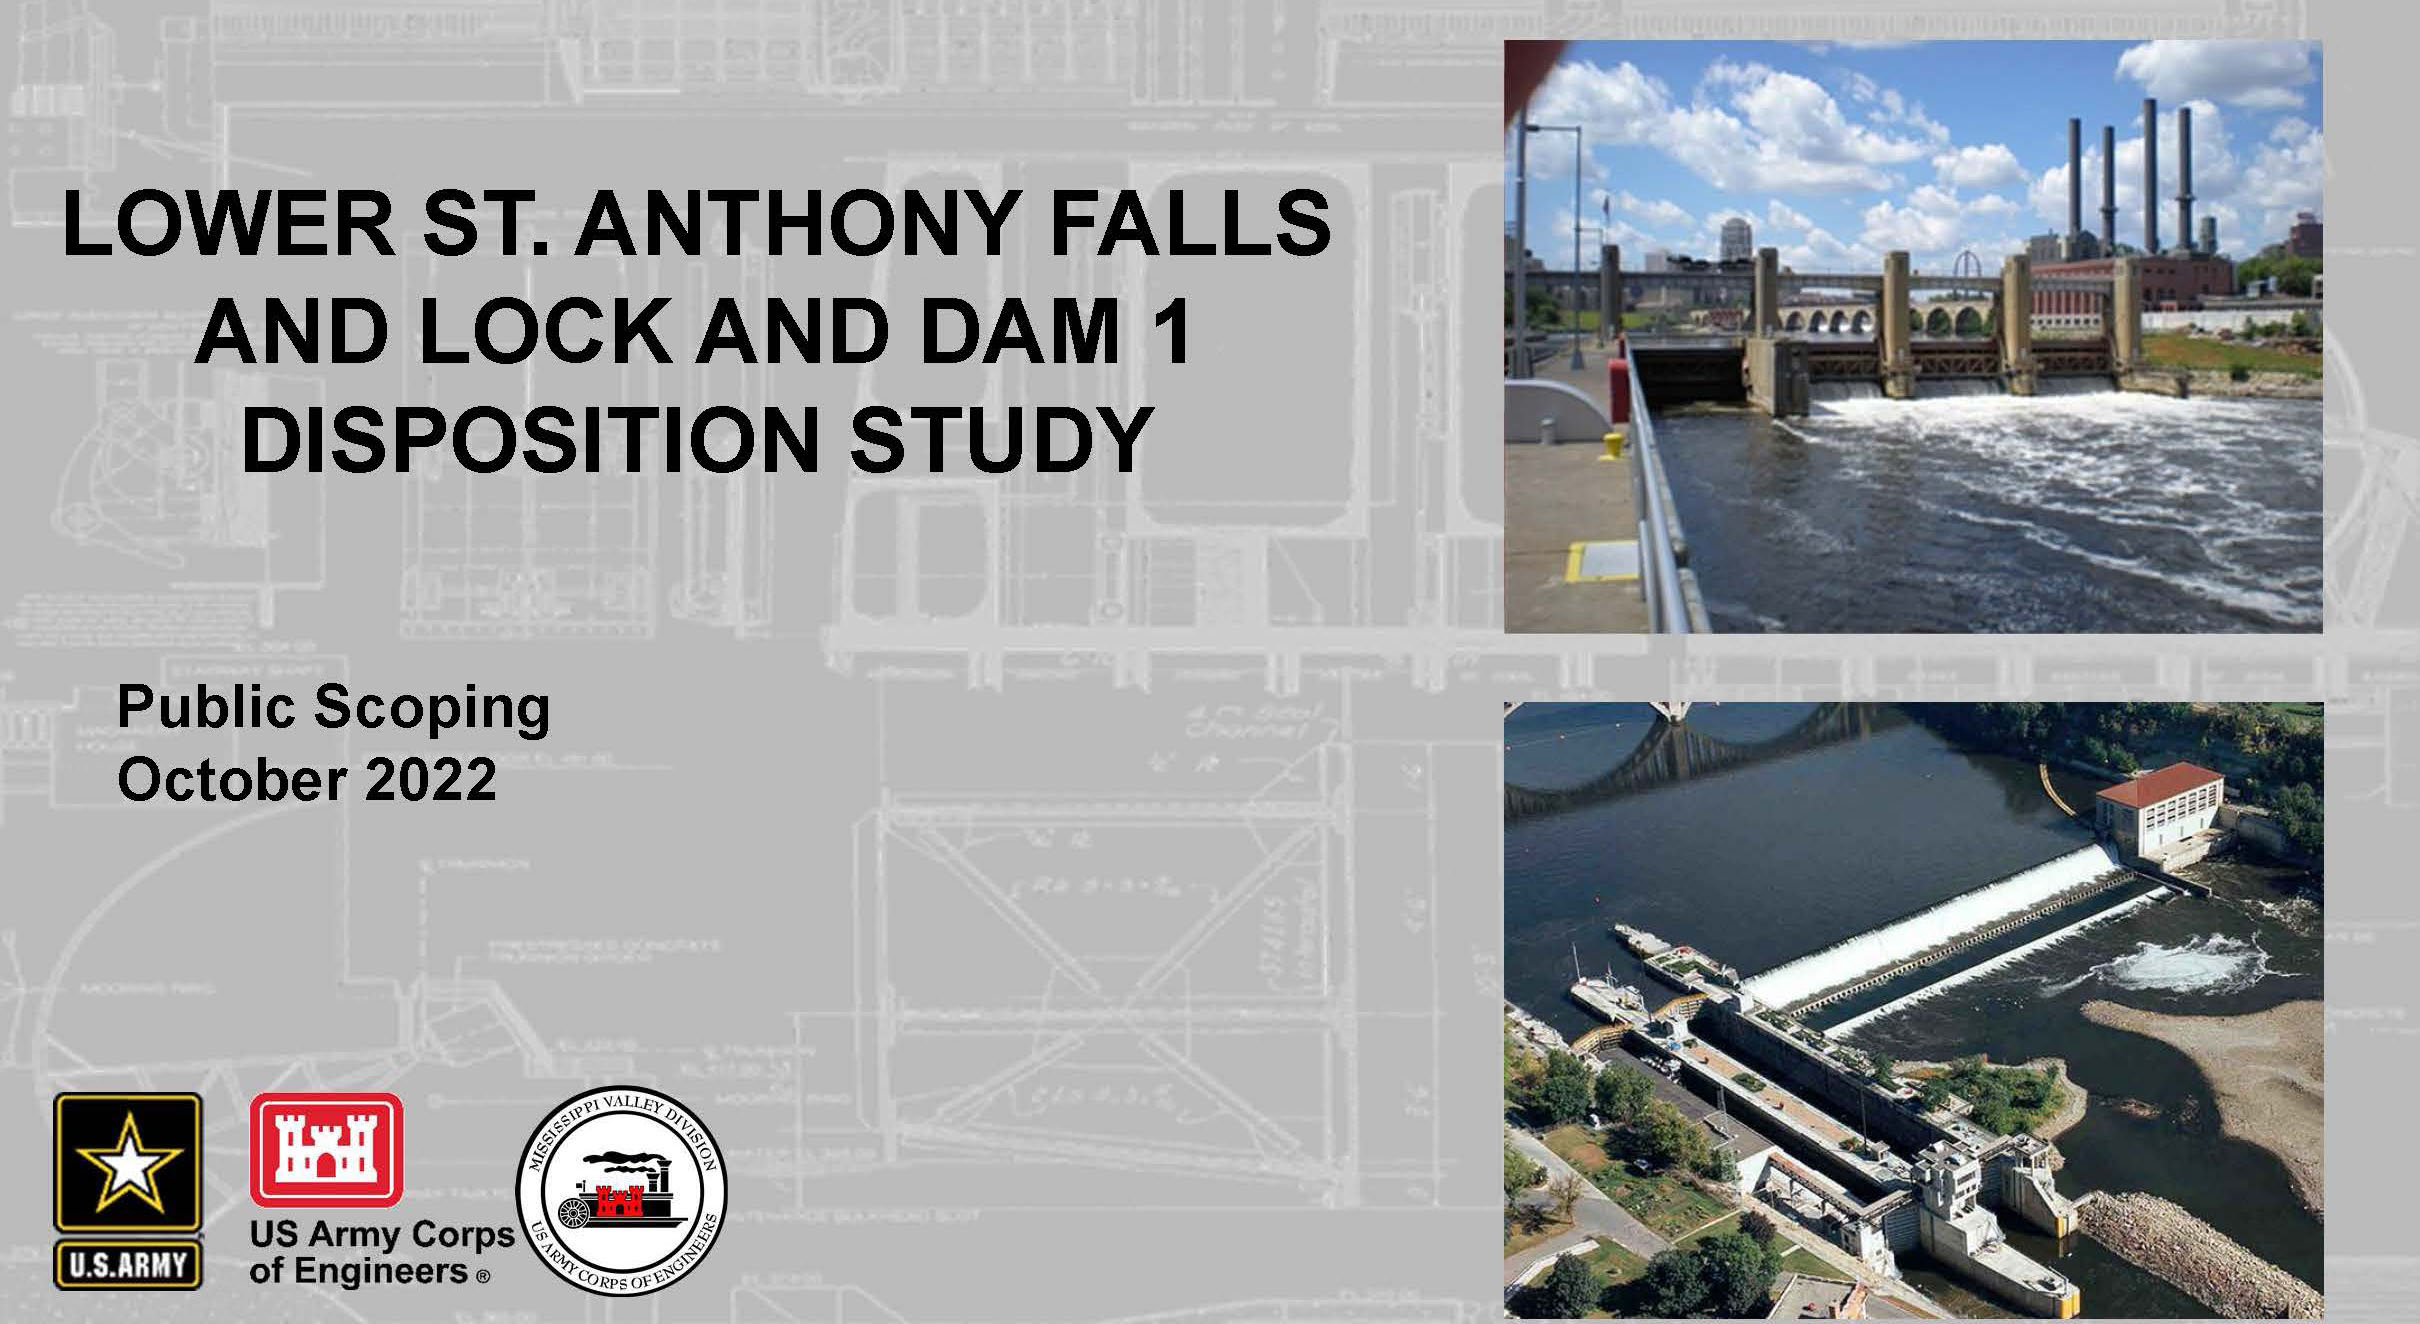 Cover slide of the Lower St. Anthony Falls Lock and Dam, and Lock and Dam 1 Disposition Study scoping presentation